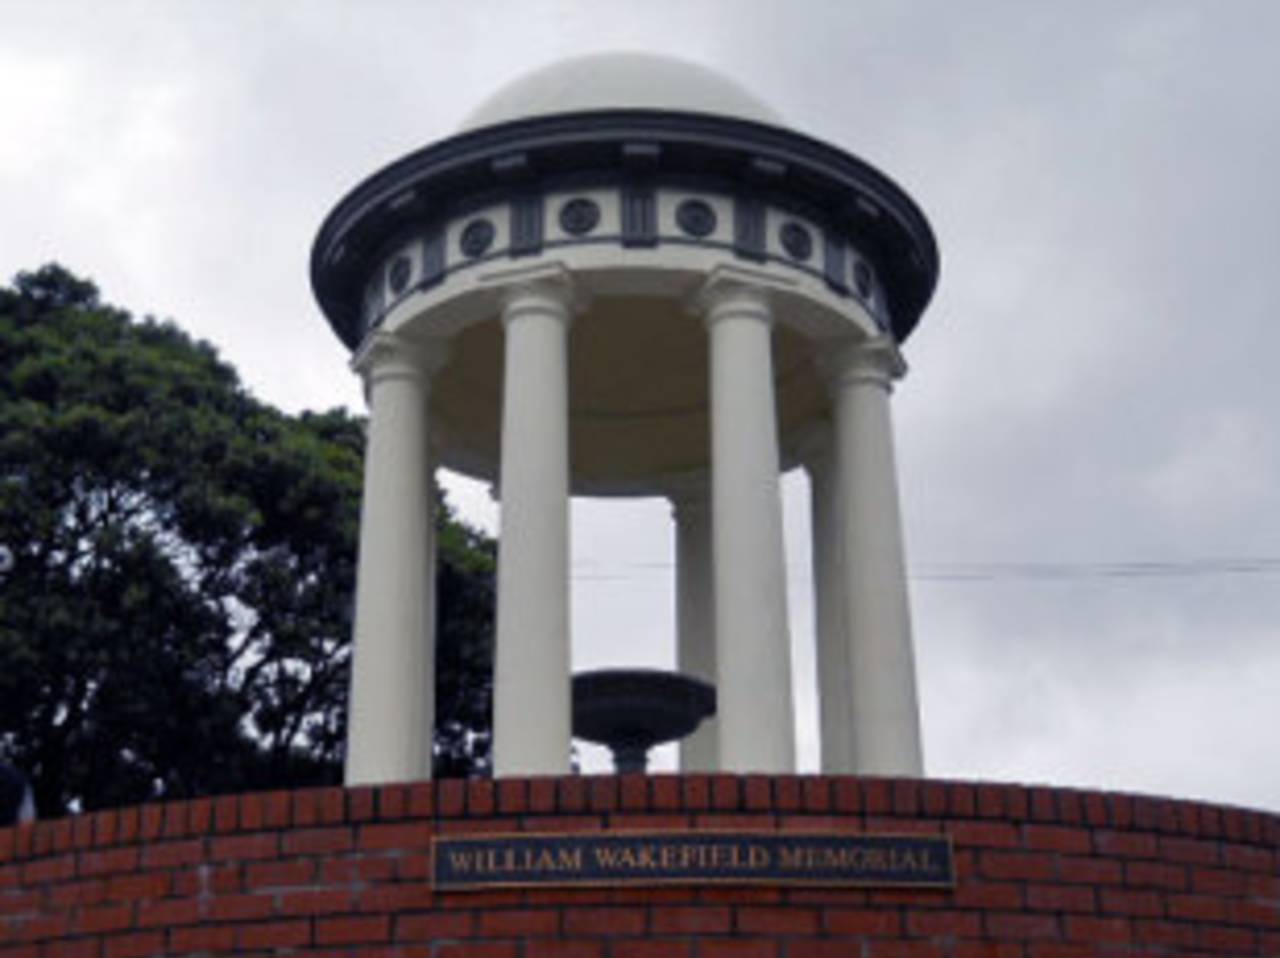 The William Wakefield memorial at the Basin Reserve, in memory of one of the founders of Wellington, March 25, 2012